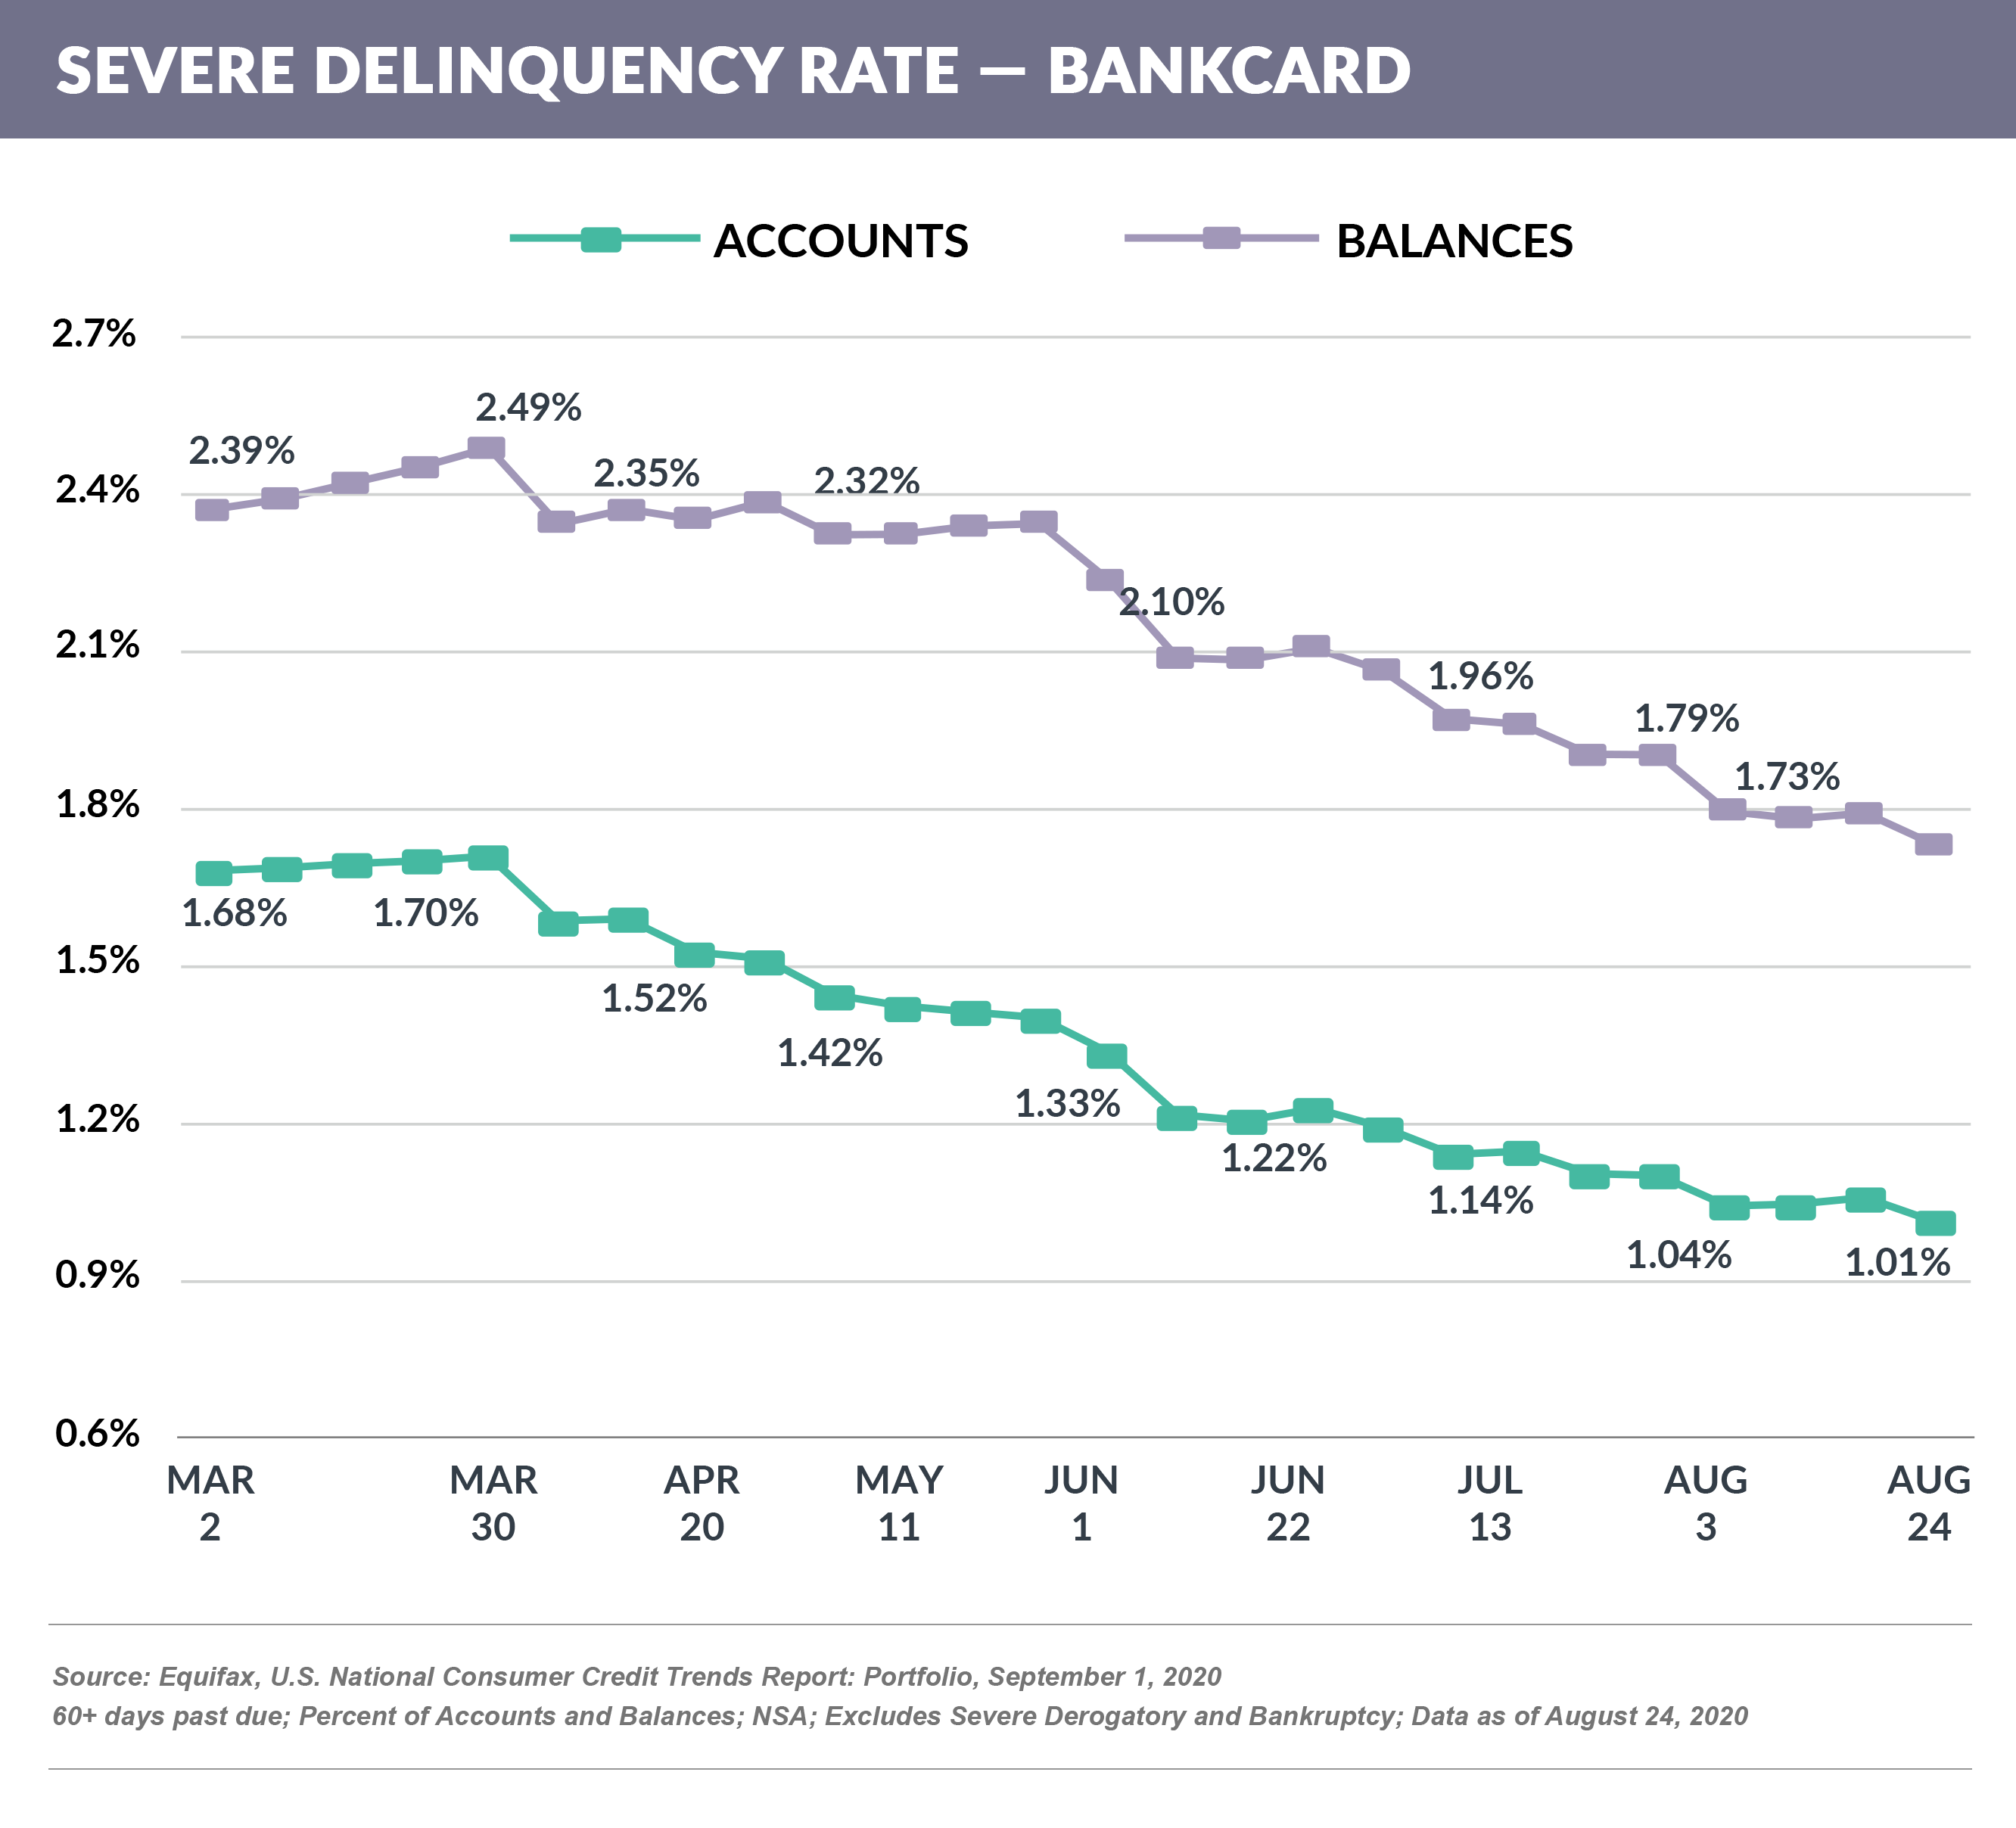 SEVERE DELINQUENCY RATE — BANKCARD 091220